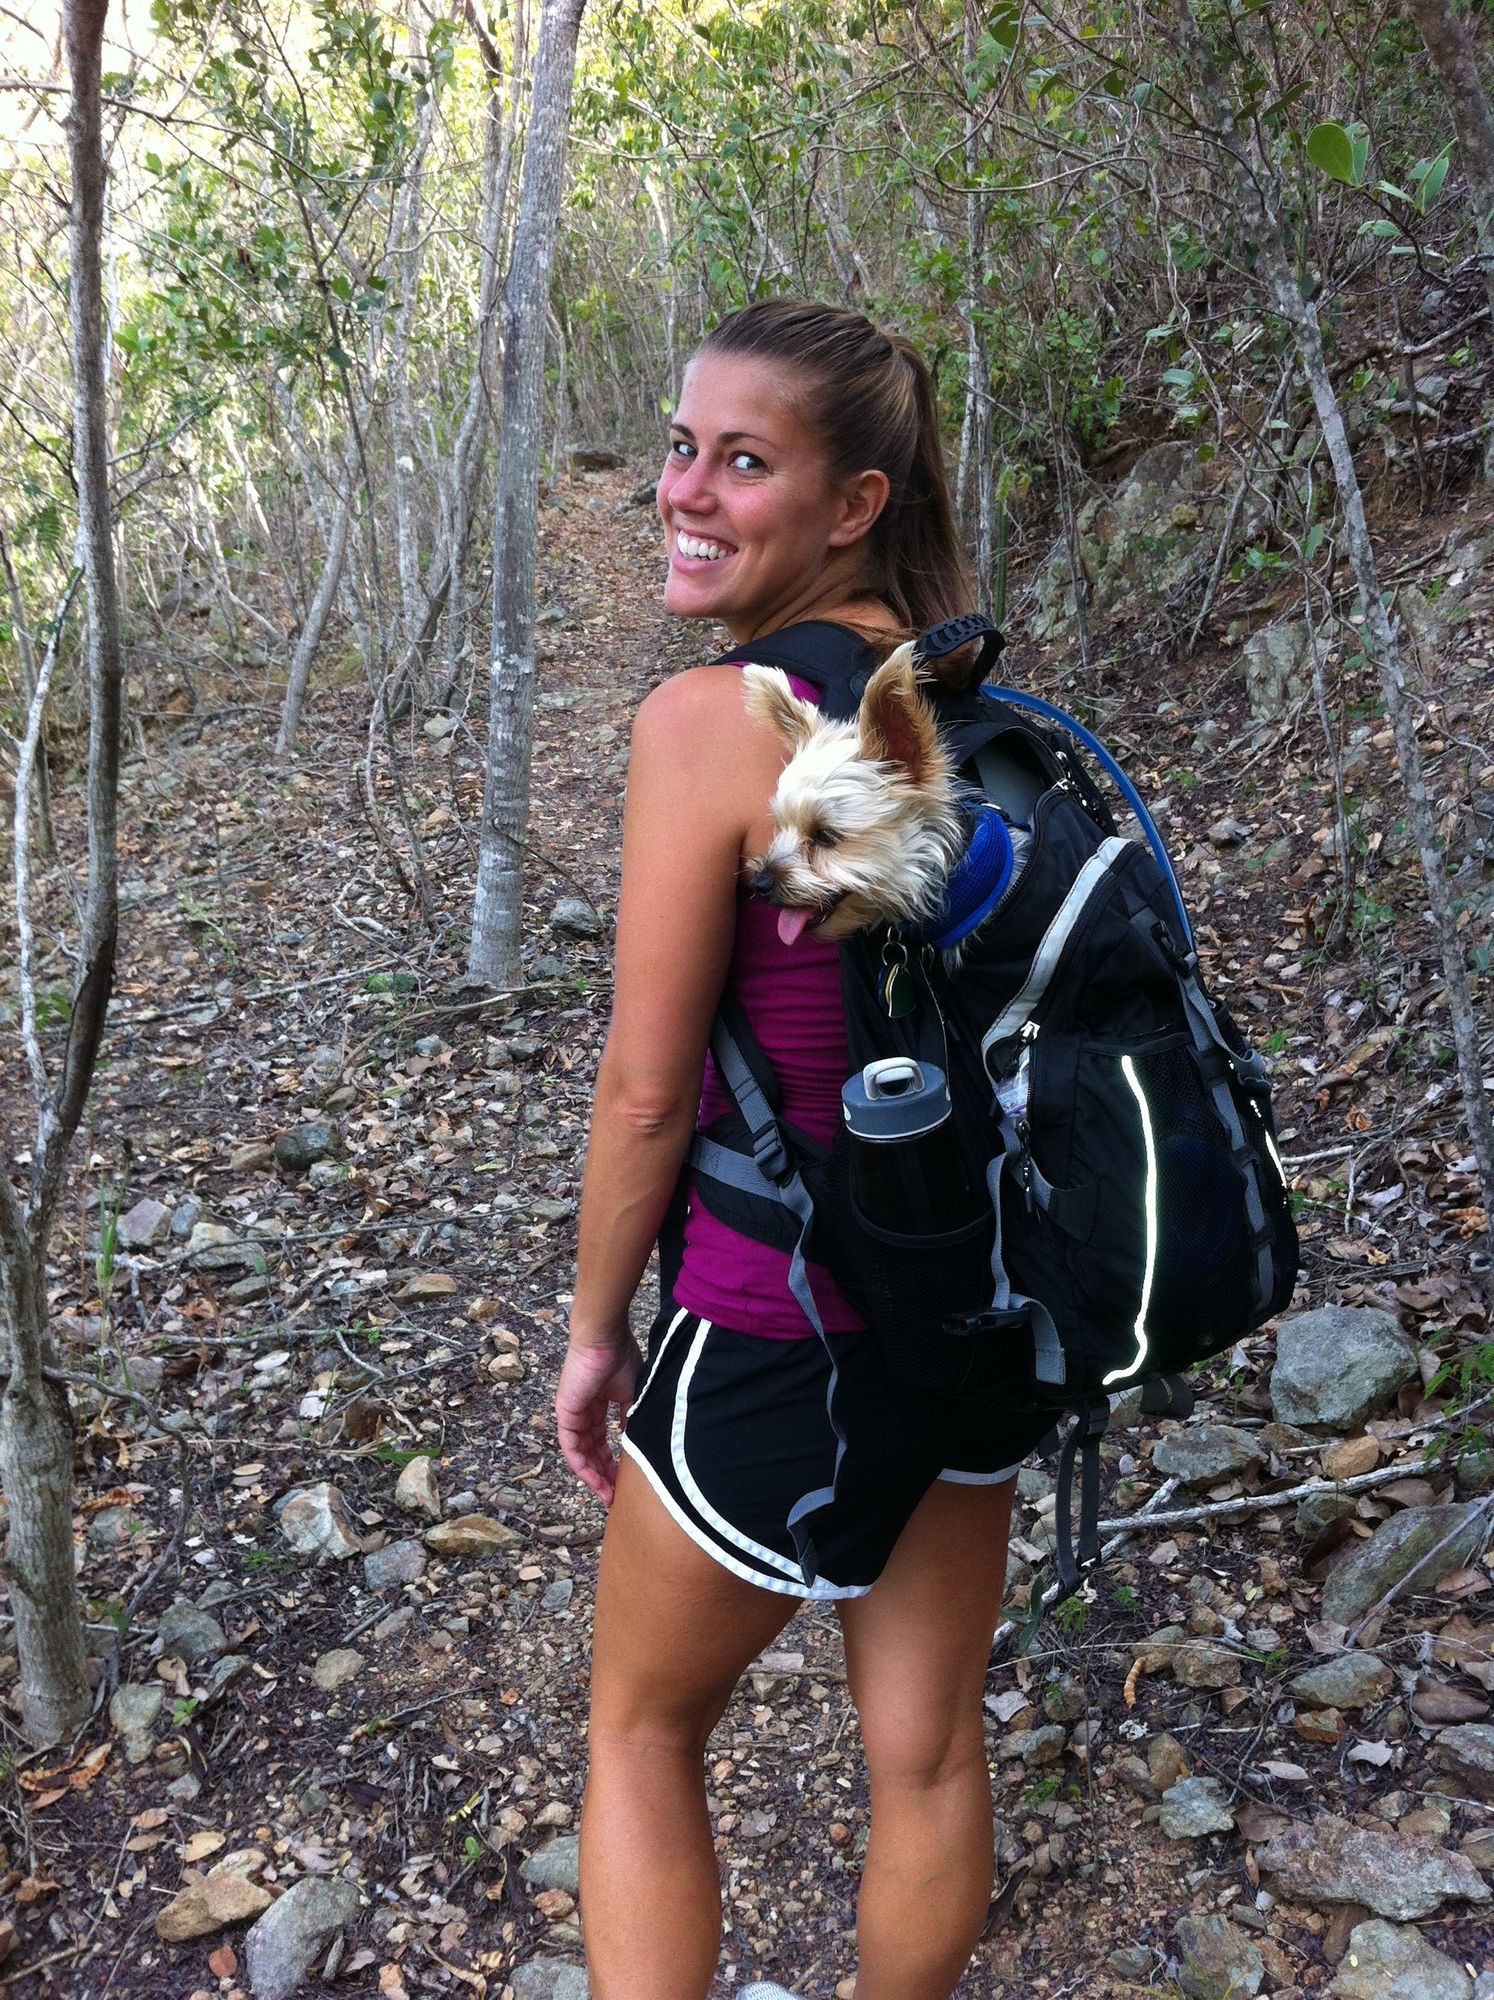 Alisa, her husband, Mike, and a Yorkie named Rocky, lived for a year in the U.S. Virgin Islands.